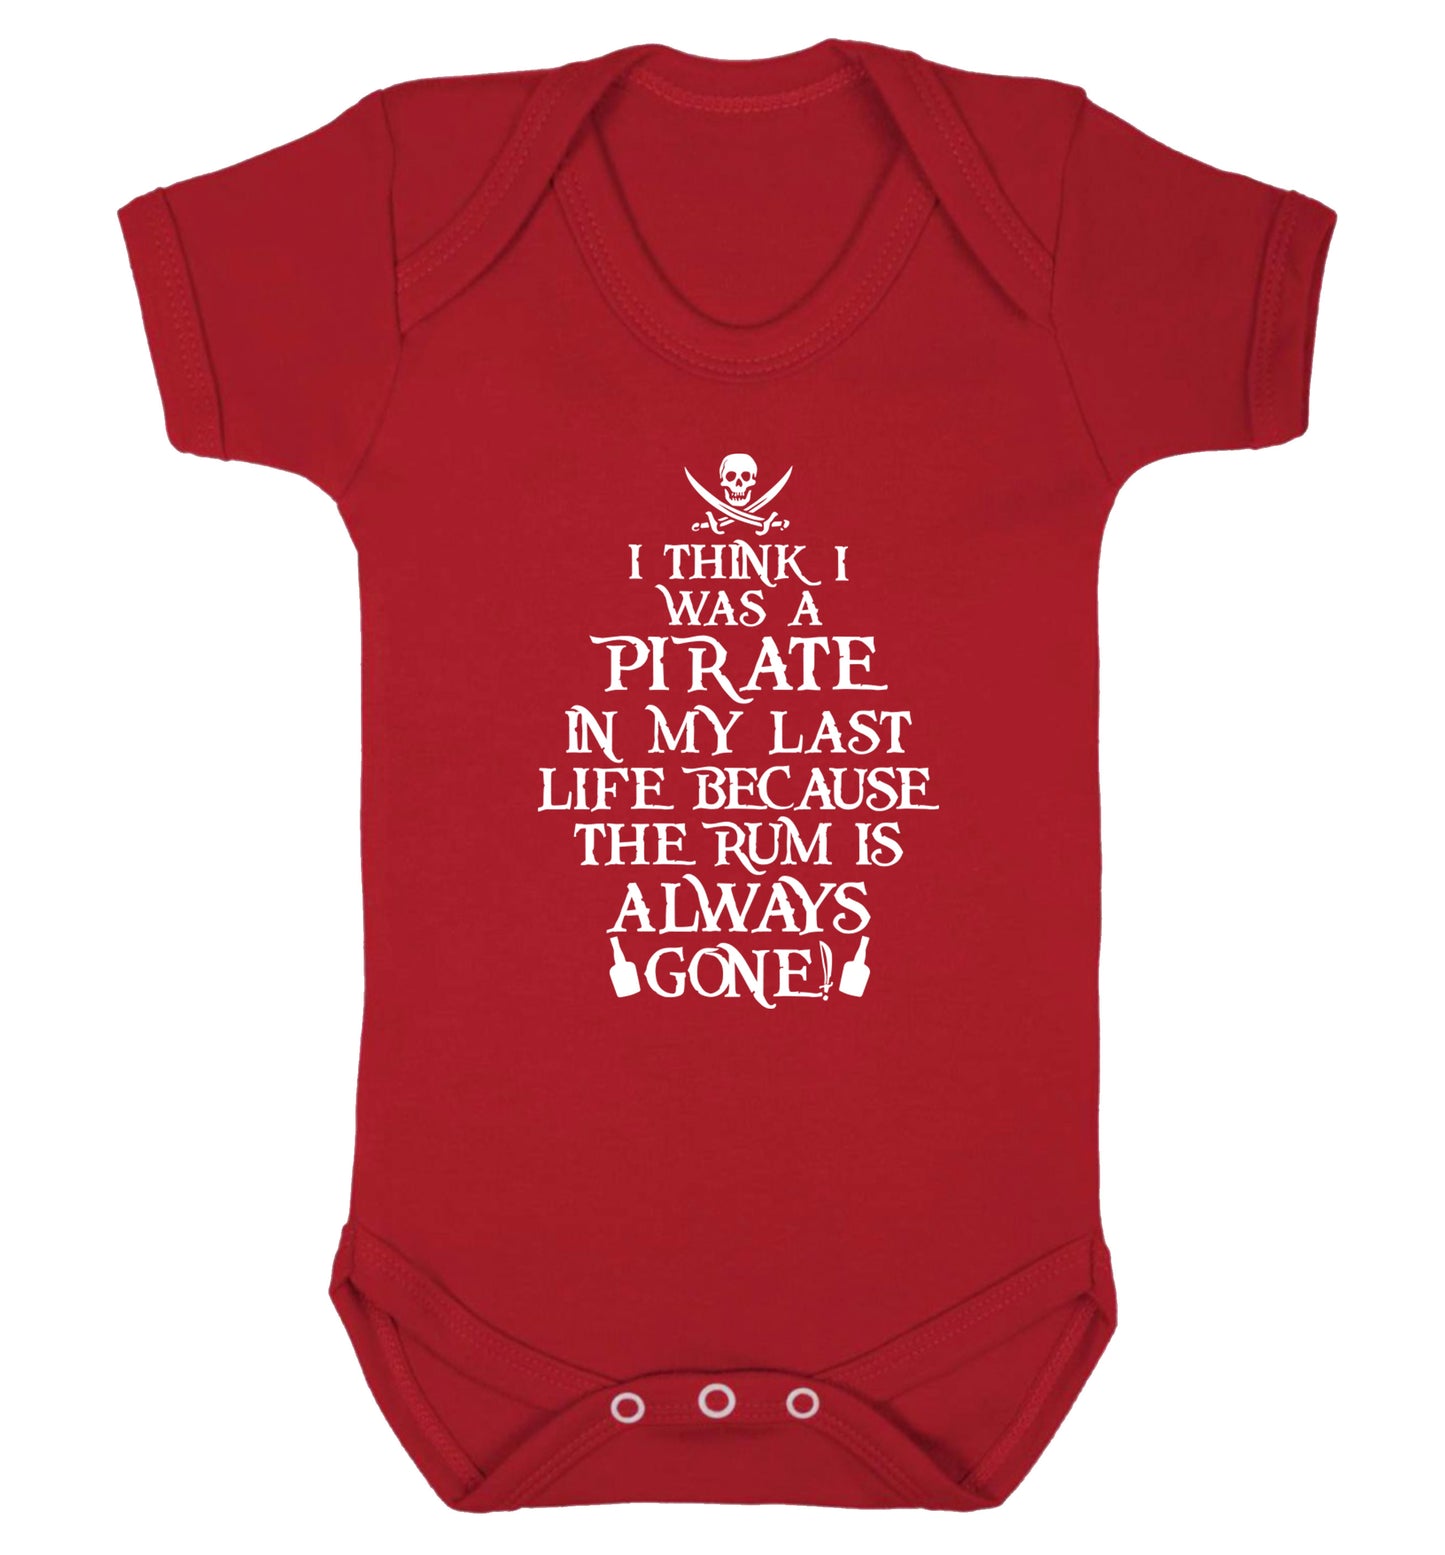 I think I was a pirate in my past life because the rum is always gone! Baby Vest red 18-24 months